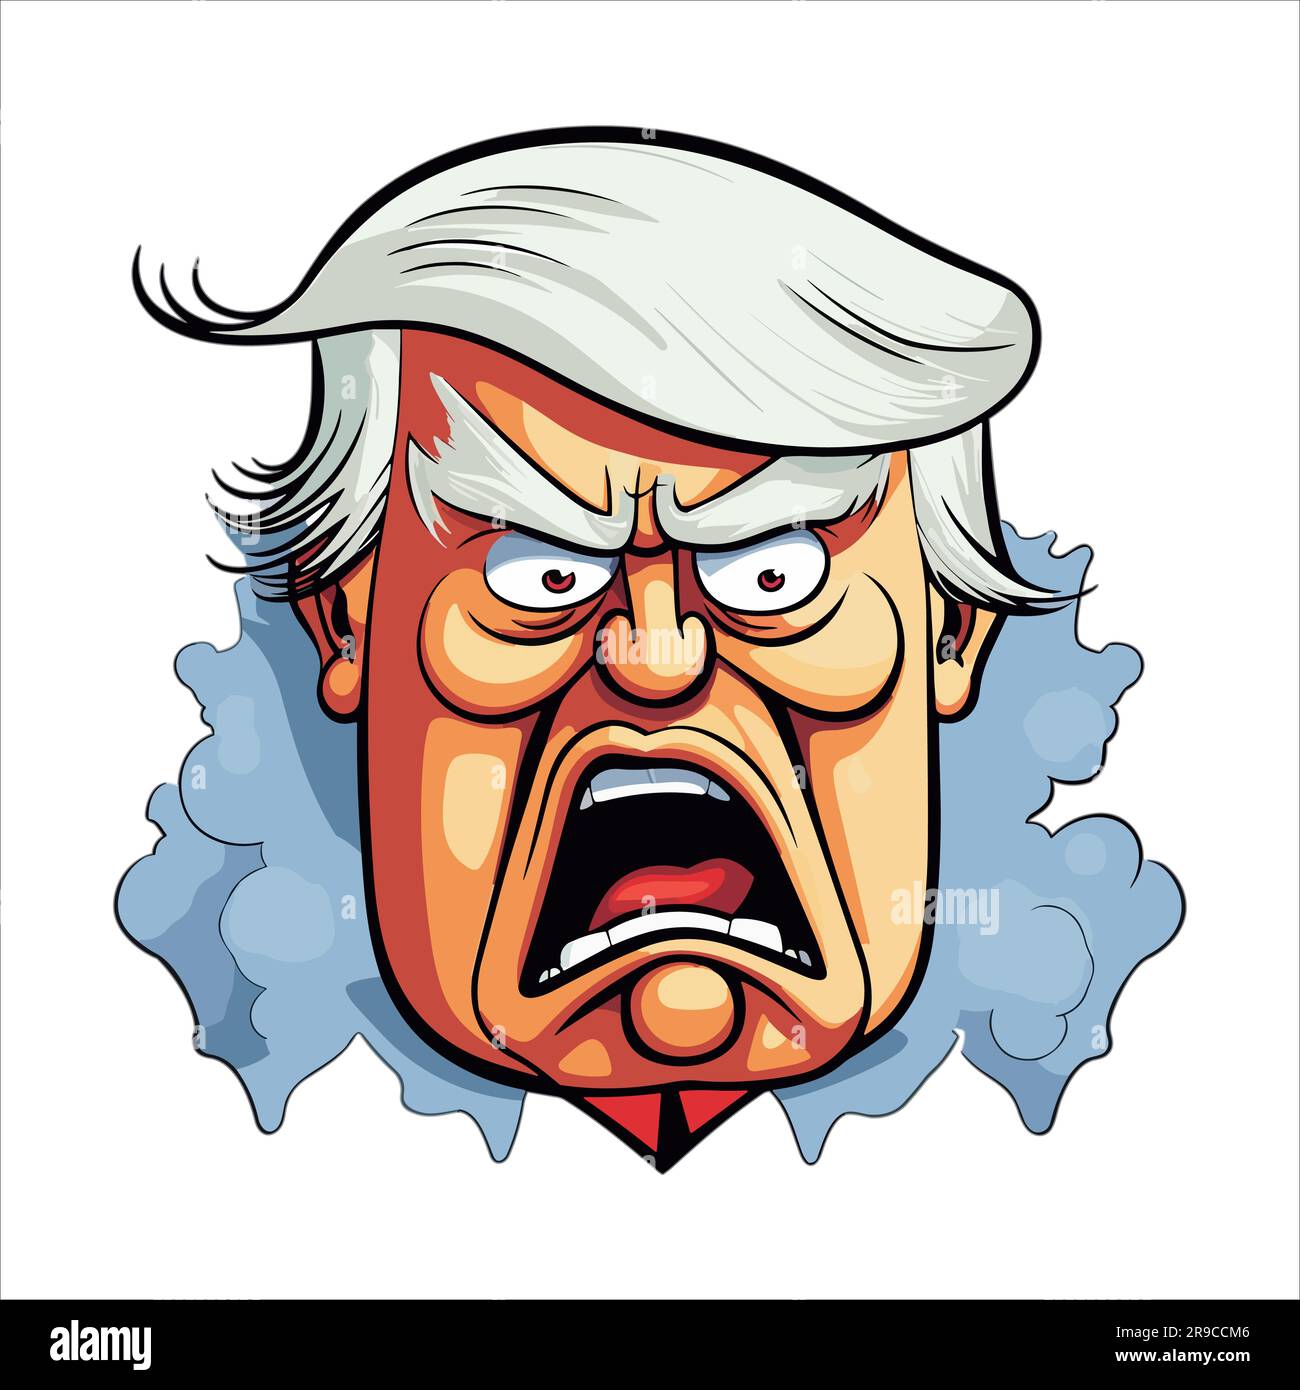 Funny Angry Donald J Trump -Vector Illustration Stock Vector